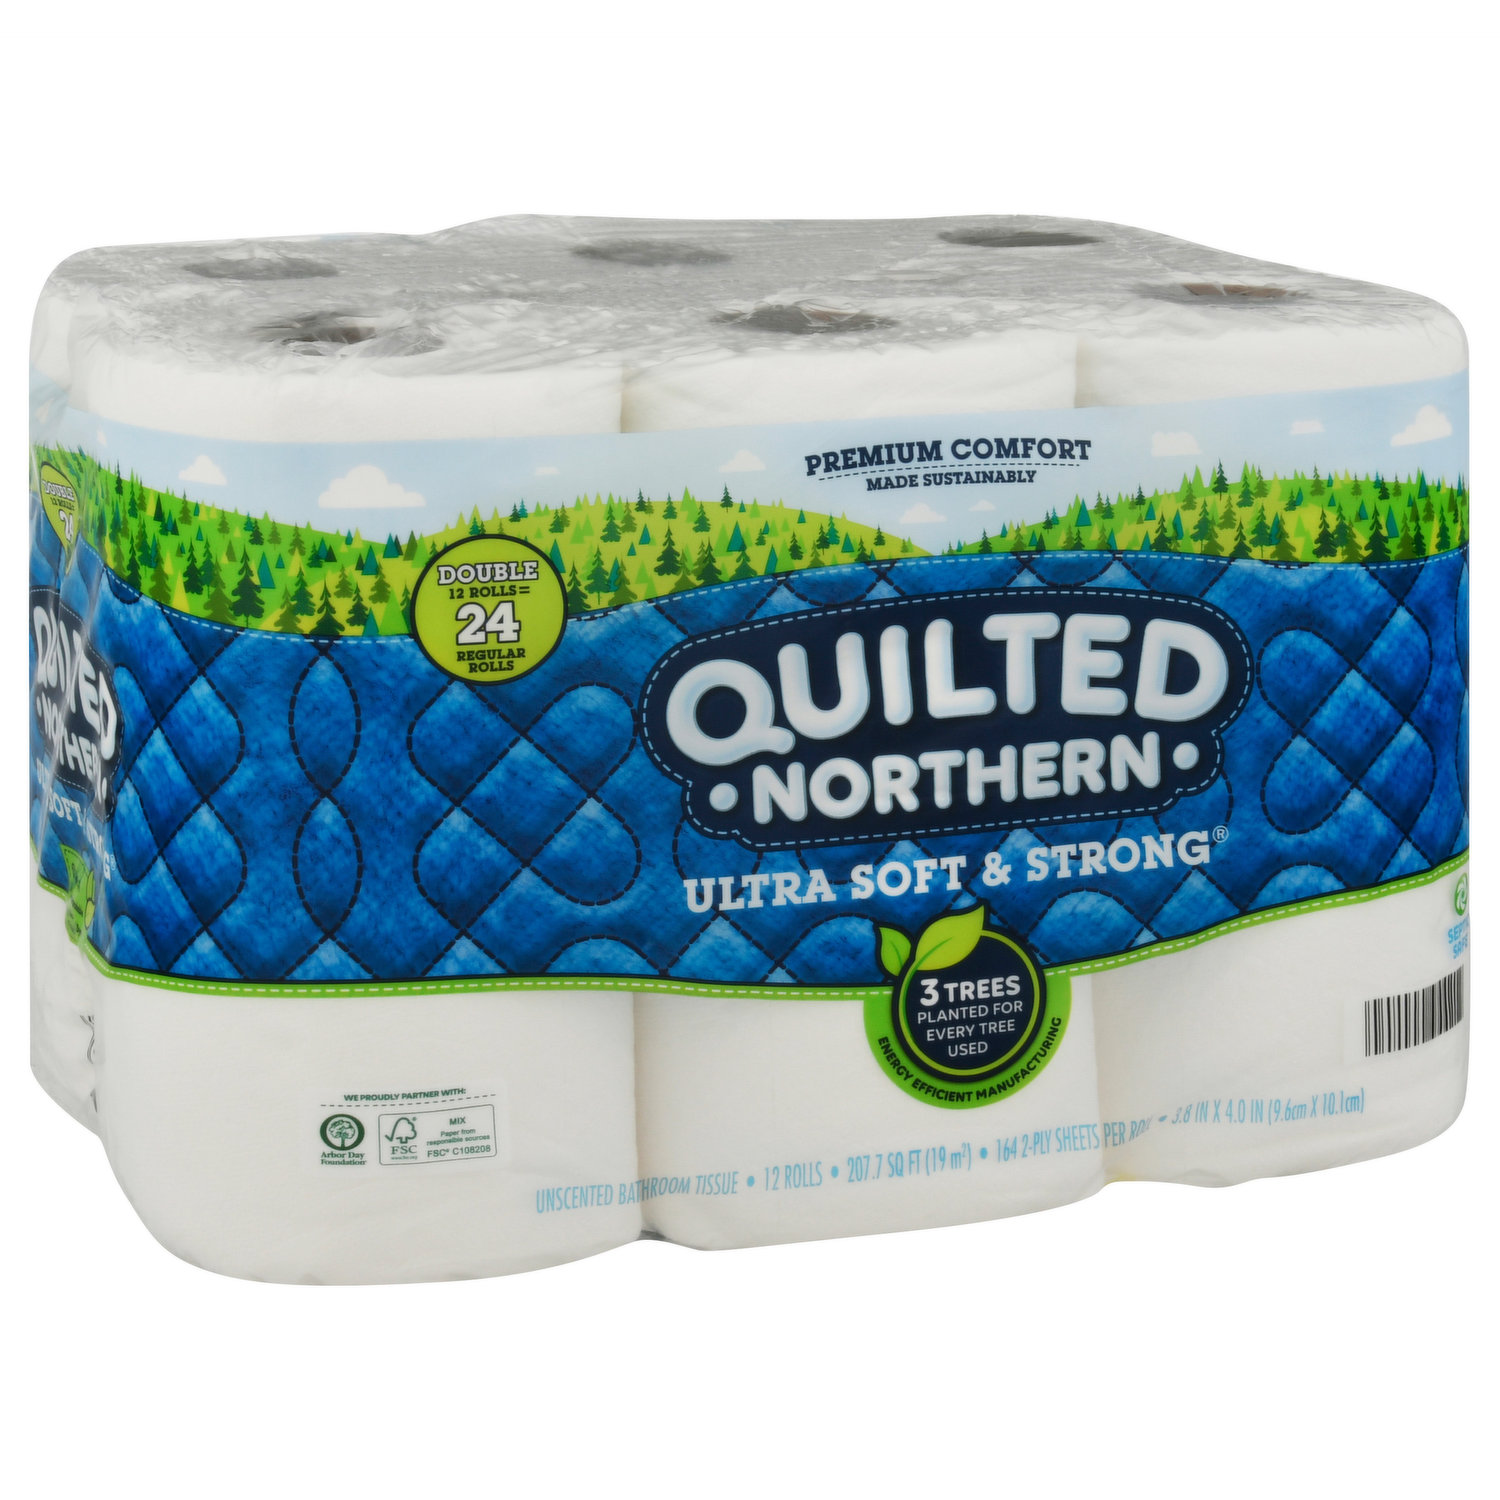 Quilted Northern Bathroom Tissue, Ultra & Strong, Double Roll, 2 Ply